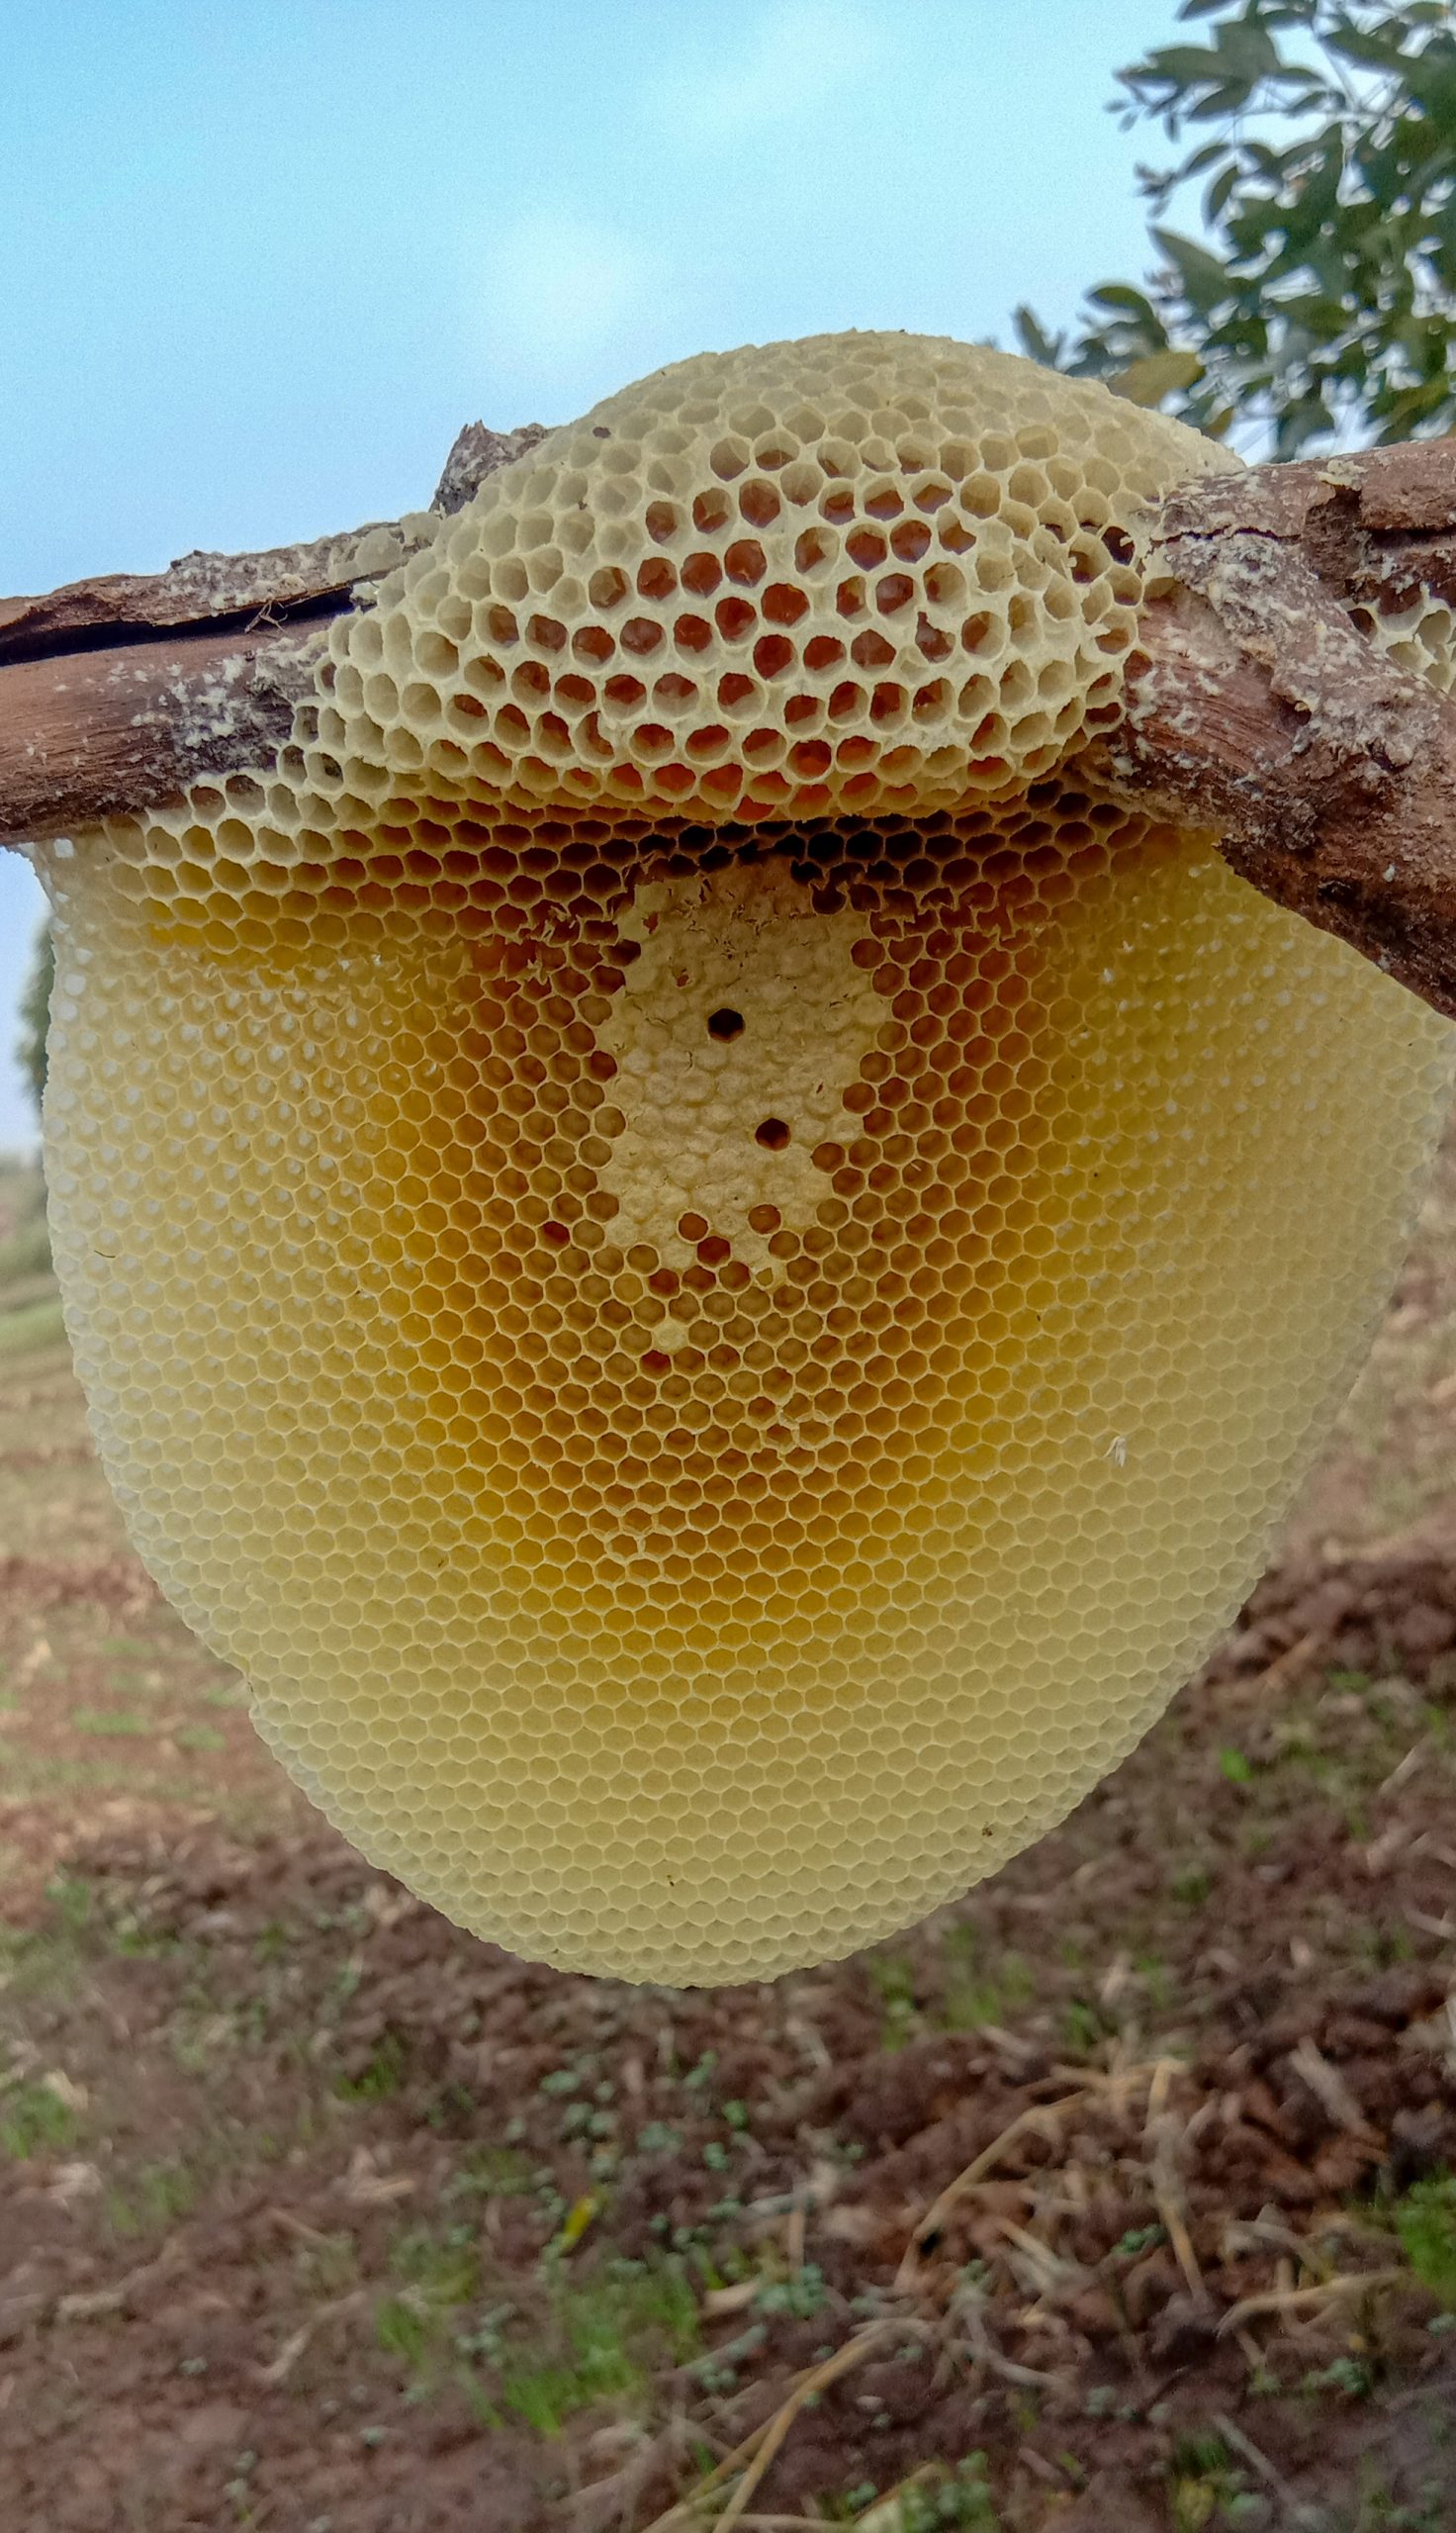 A beehive